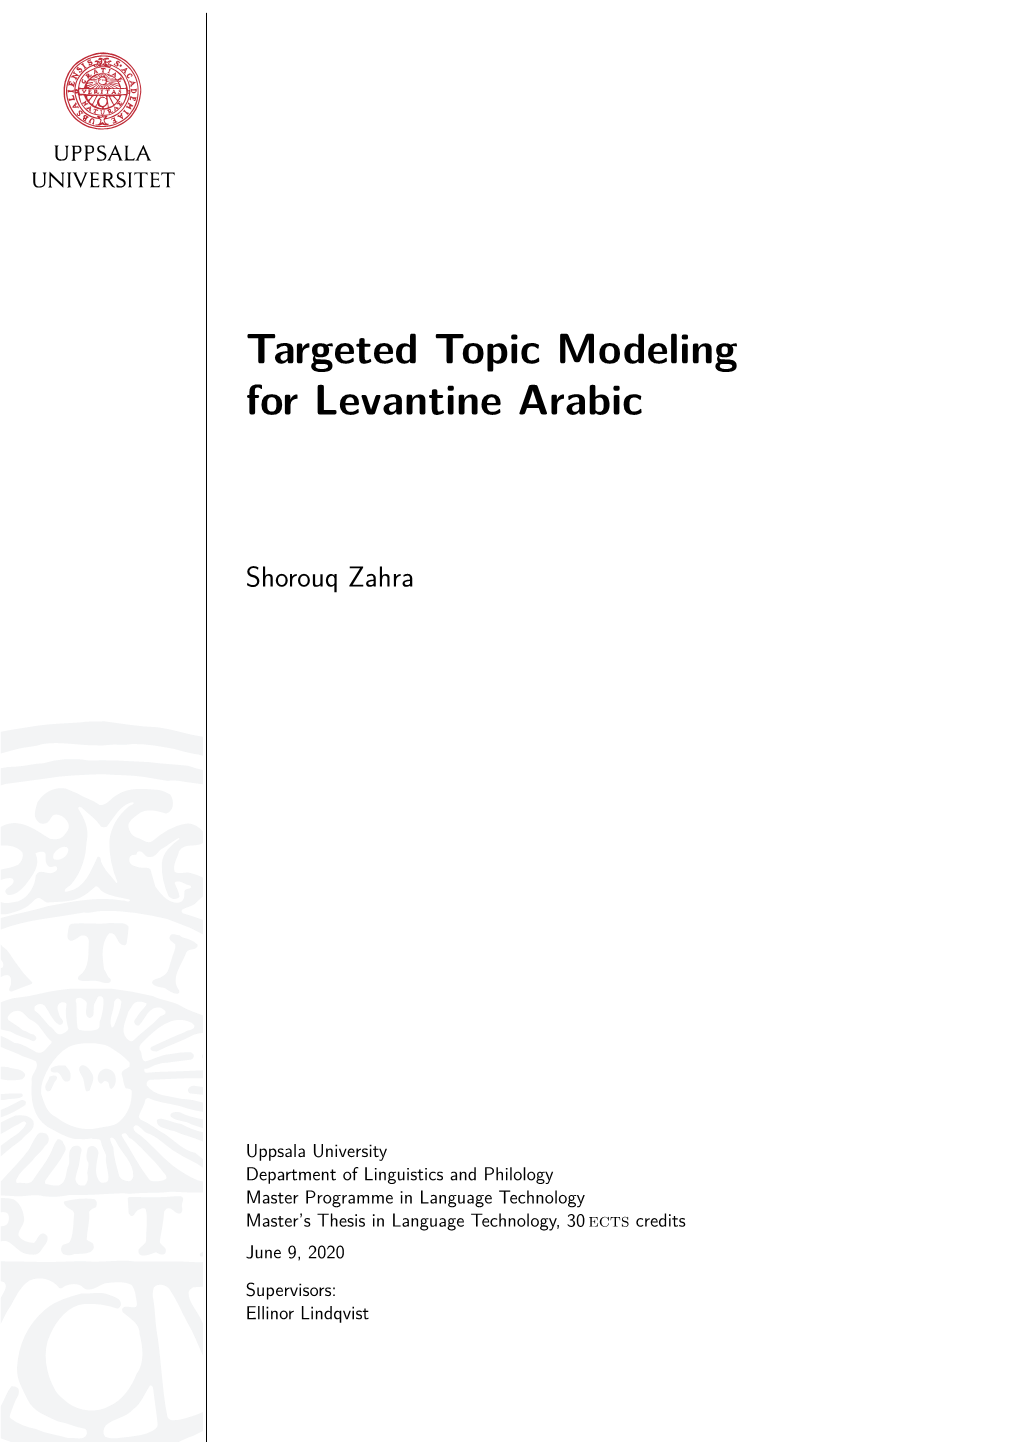 Targeted Topic Modeling for Levantine Arabic